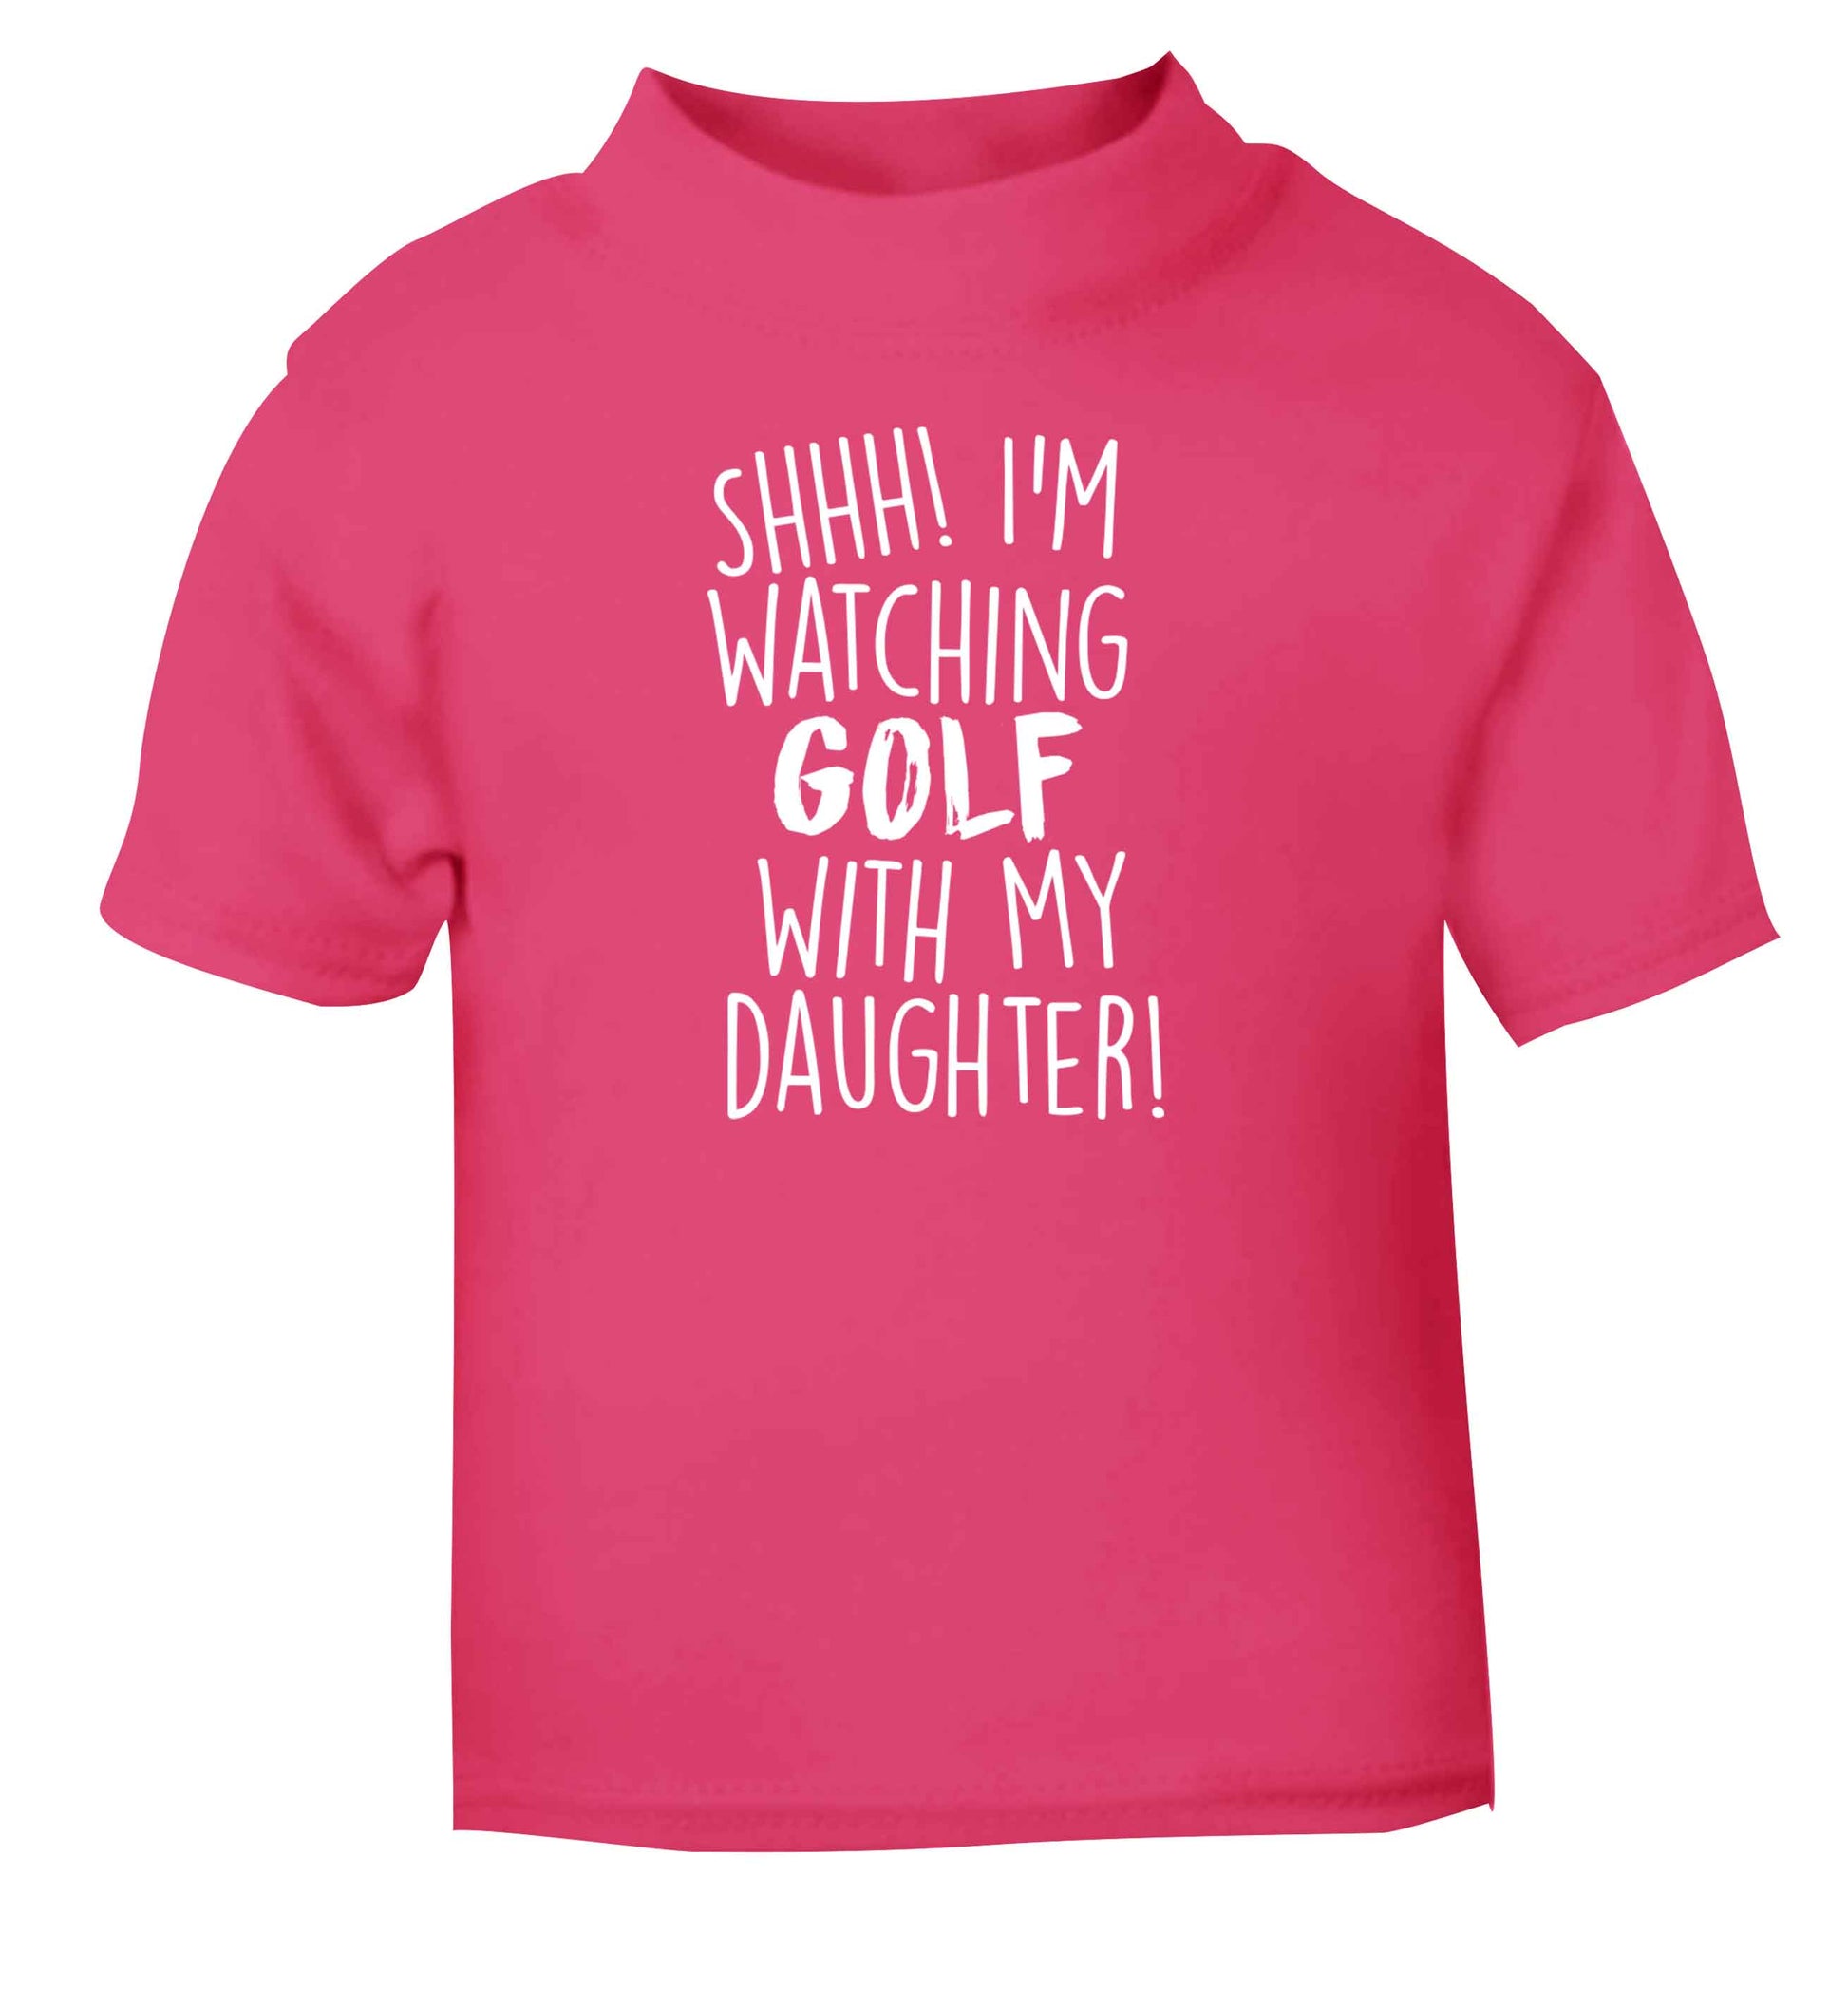 Shh I'm watching golf with my daughter pink Baby Toddler Tshirt 2 Years